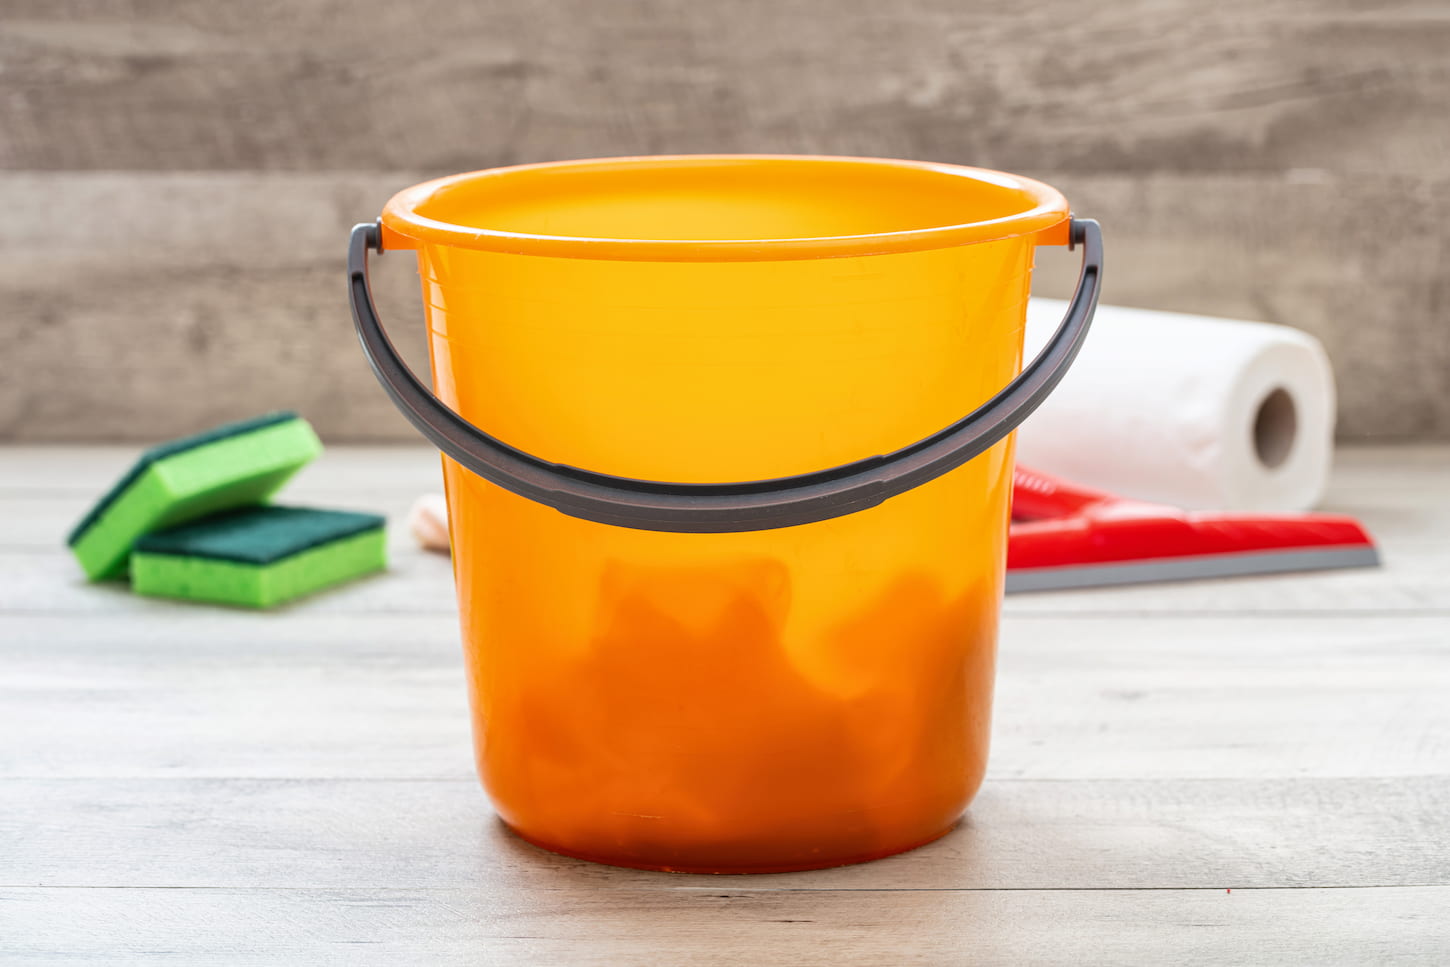 An image of a home depot style orange bucket on a wooden floor background.